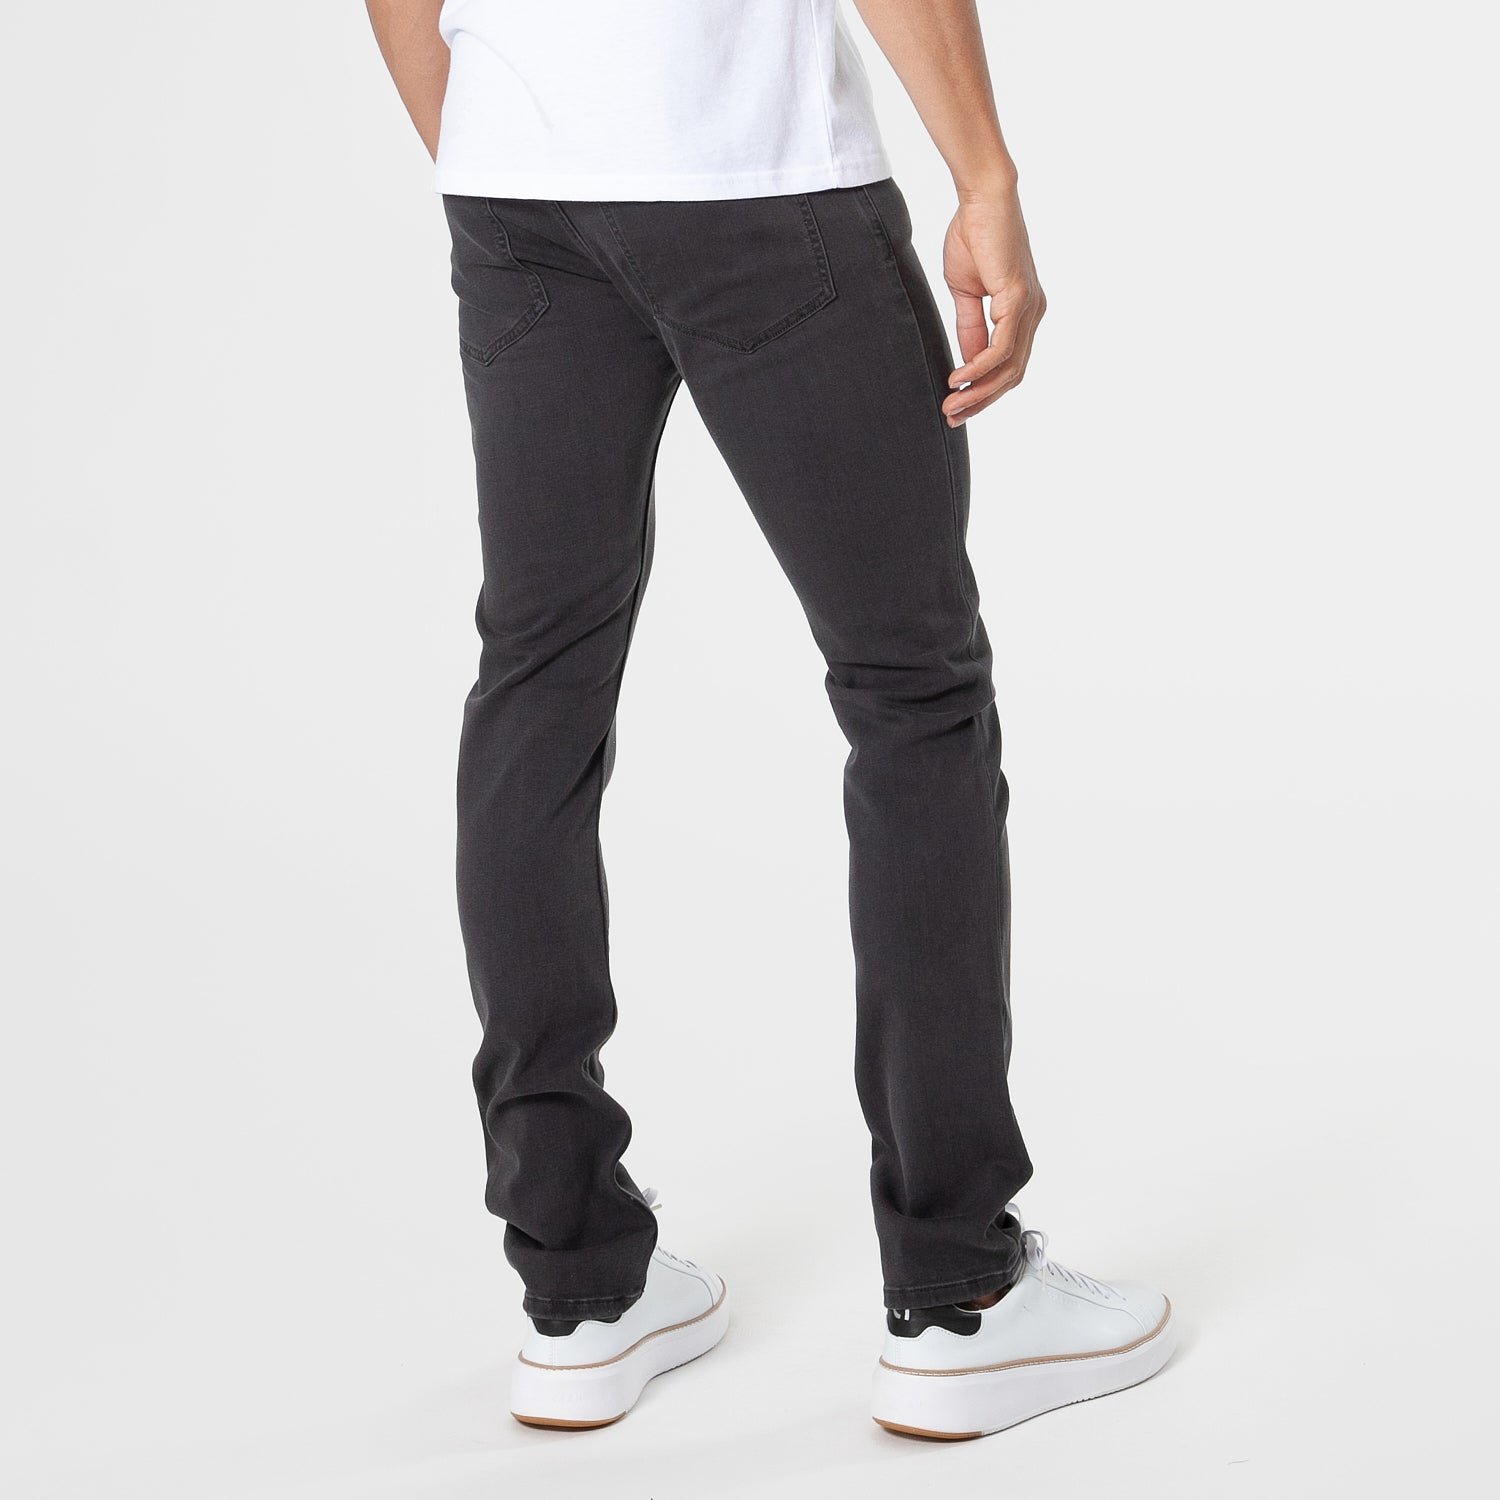 Gray and Indigo Slim Fit Comfort Jeans 2-Pack